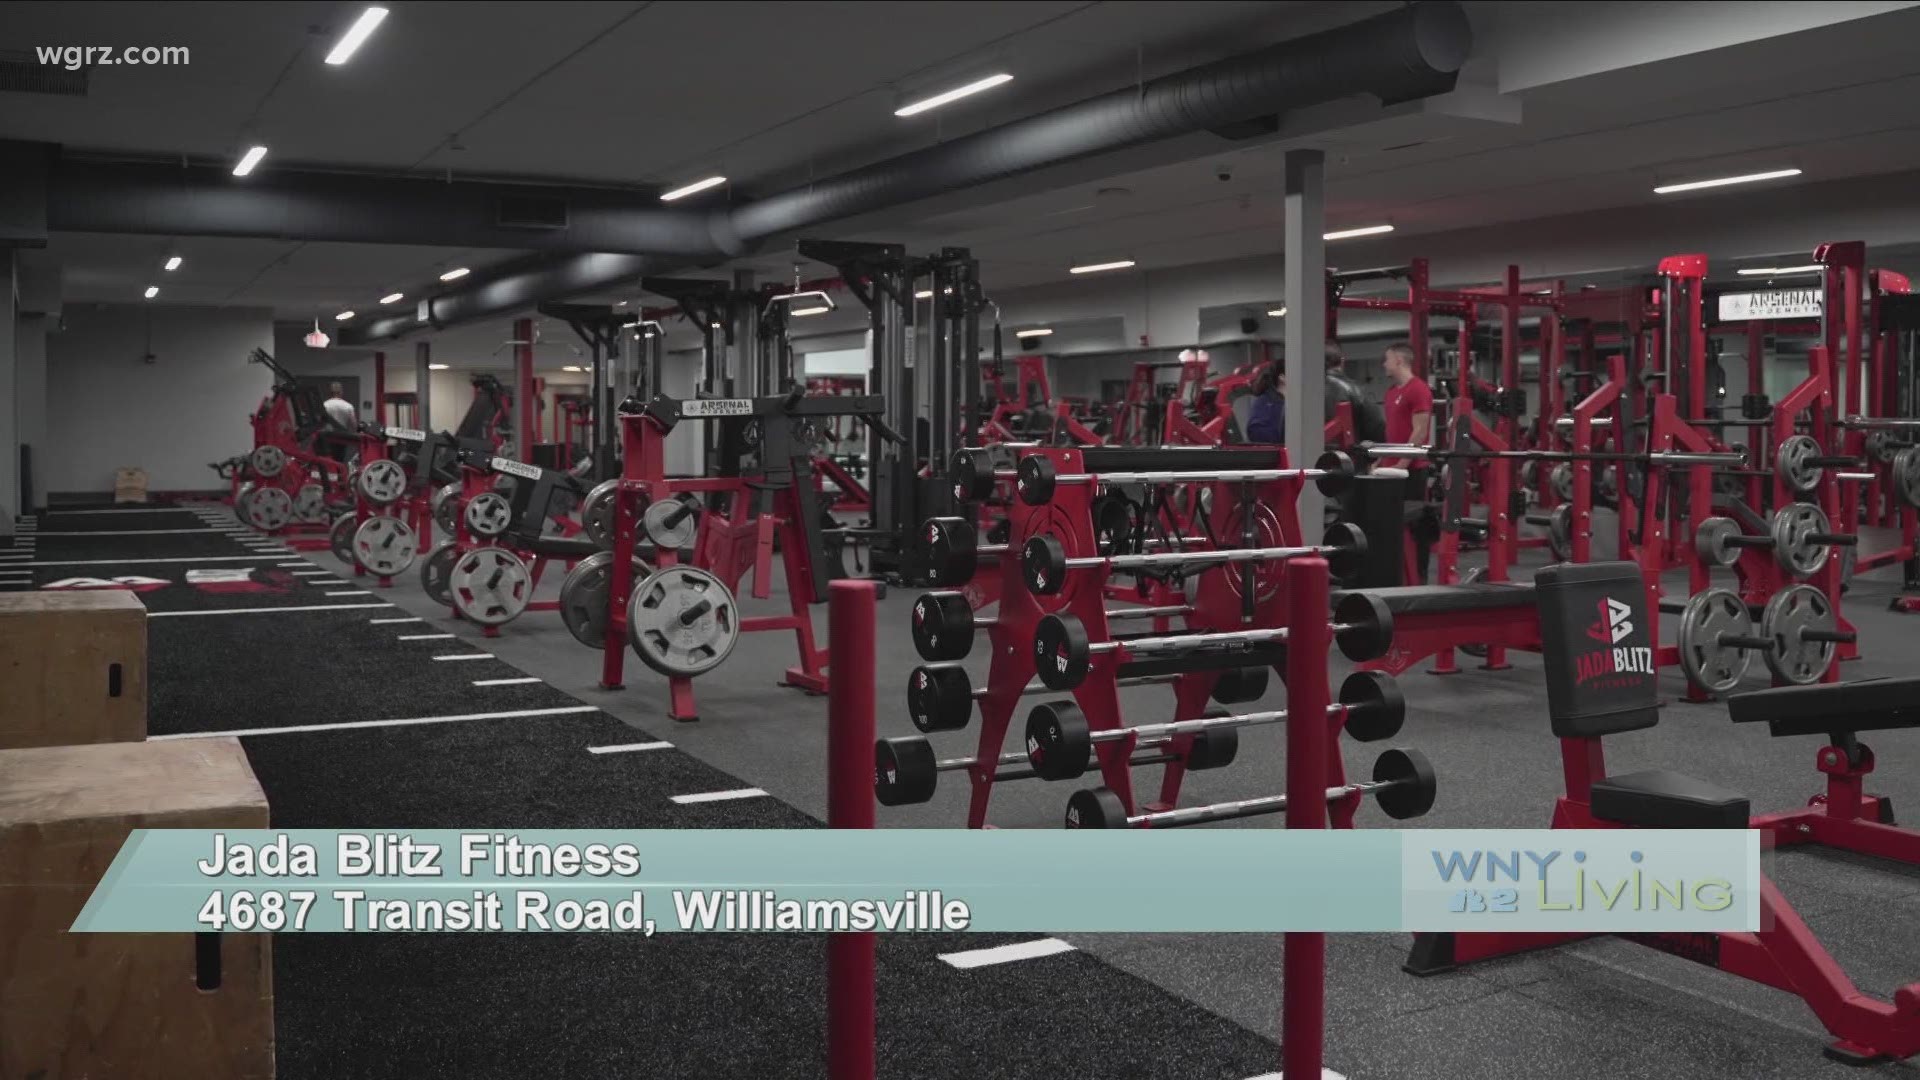 WNY Living - March 13 - Jada Blitz Fitness (THIS VIDEO IS SPONSORED BY JADA BLITZ FITNESS)